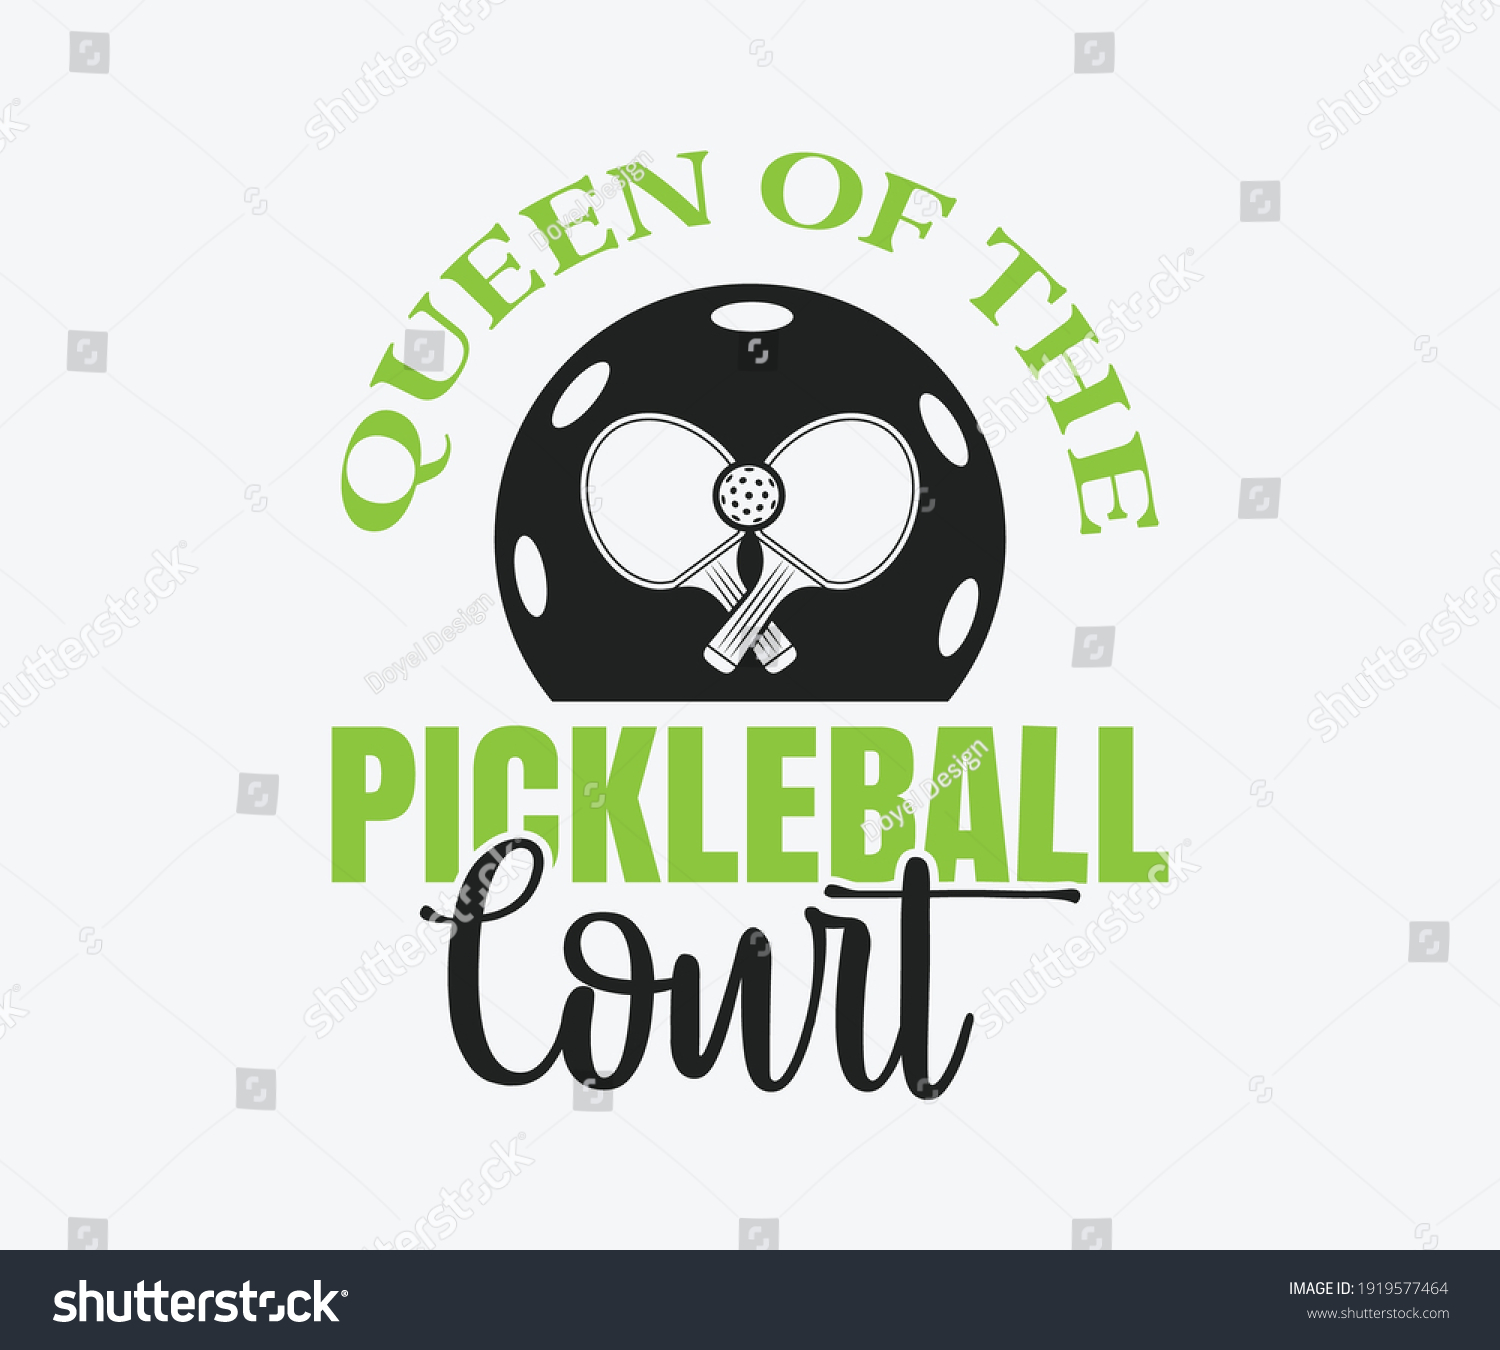 SVG of Queen of the pickleball court, Printable Vector Illustration. Pickleball SVG. Great for badge t-shirt and postcard designs. Vector graphic illustration. svg